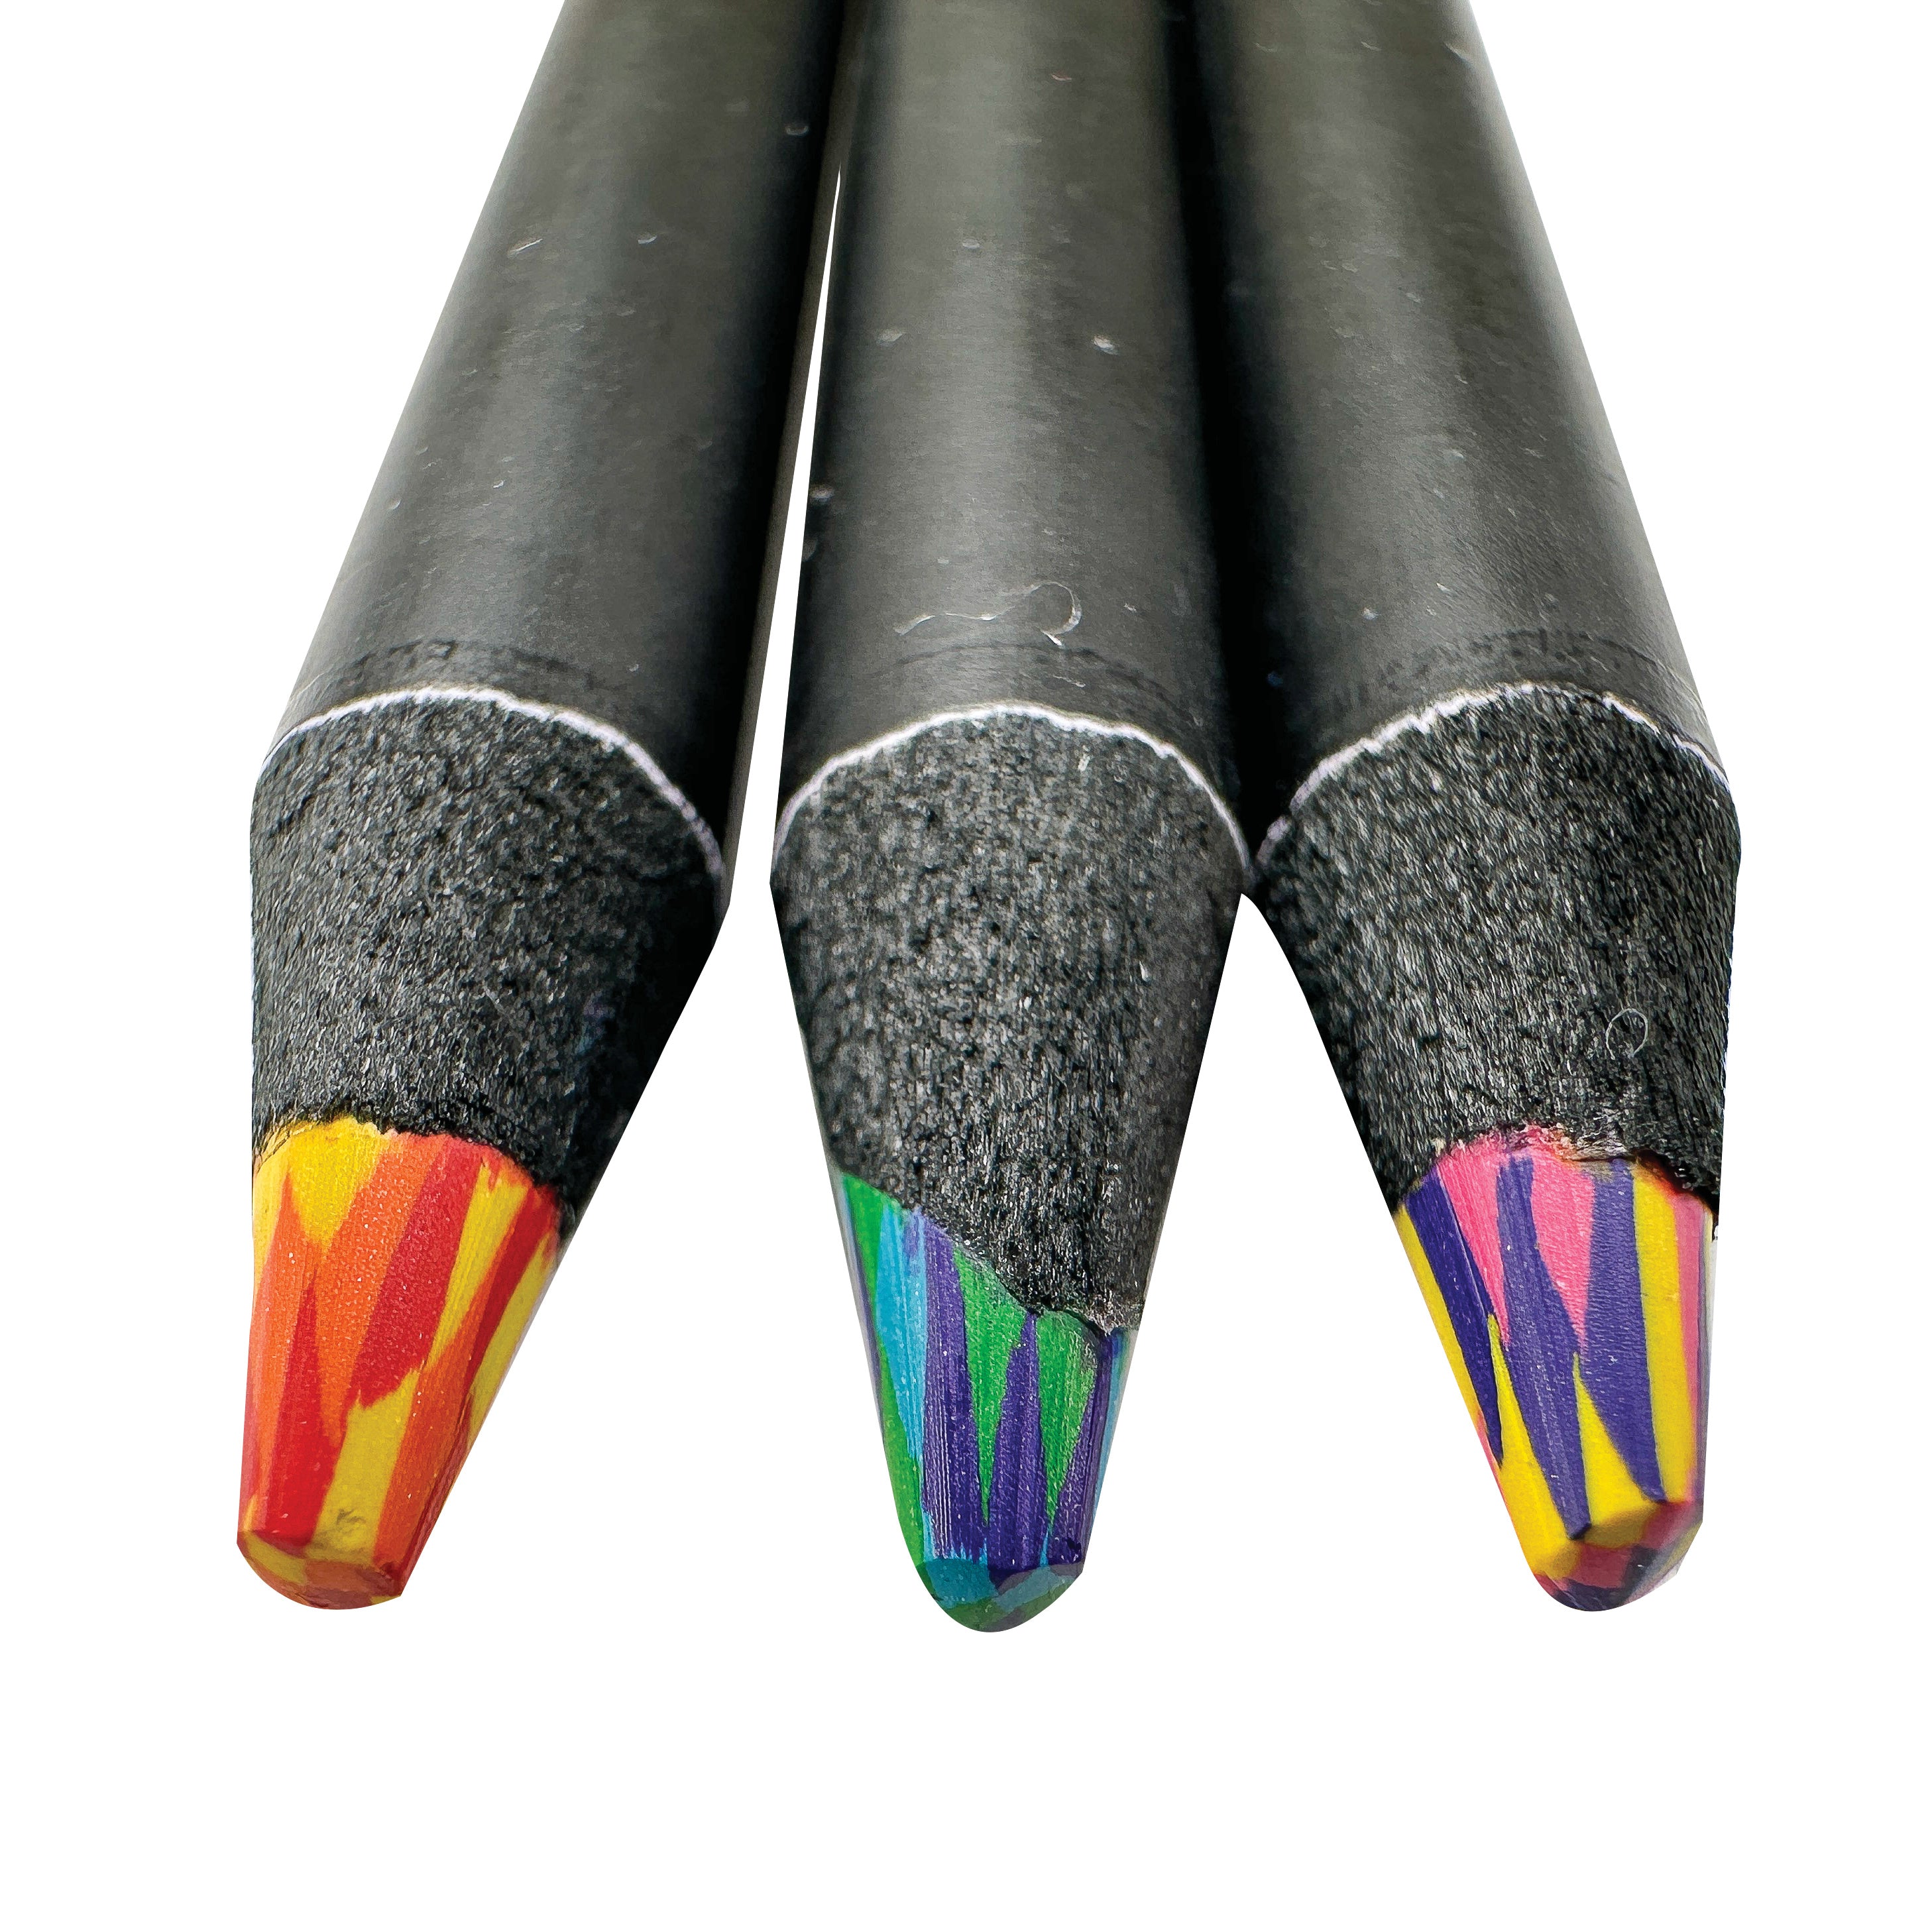 Getty Marbled Tricolor Pencil - Getty Museum Store